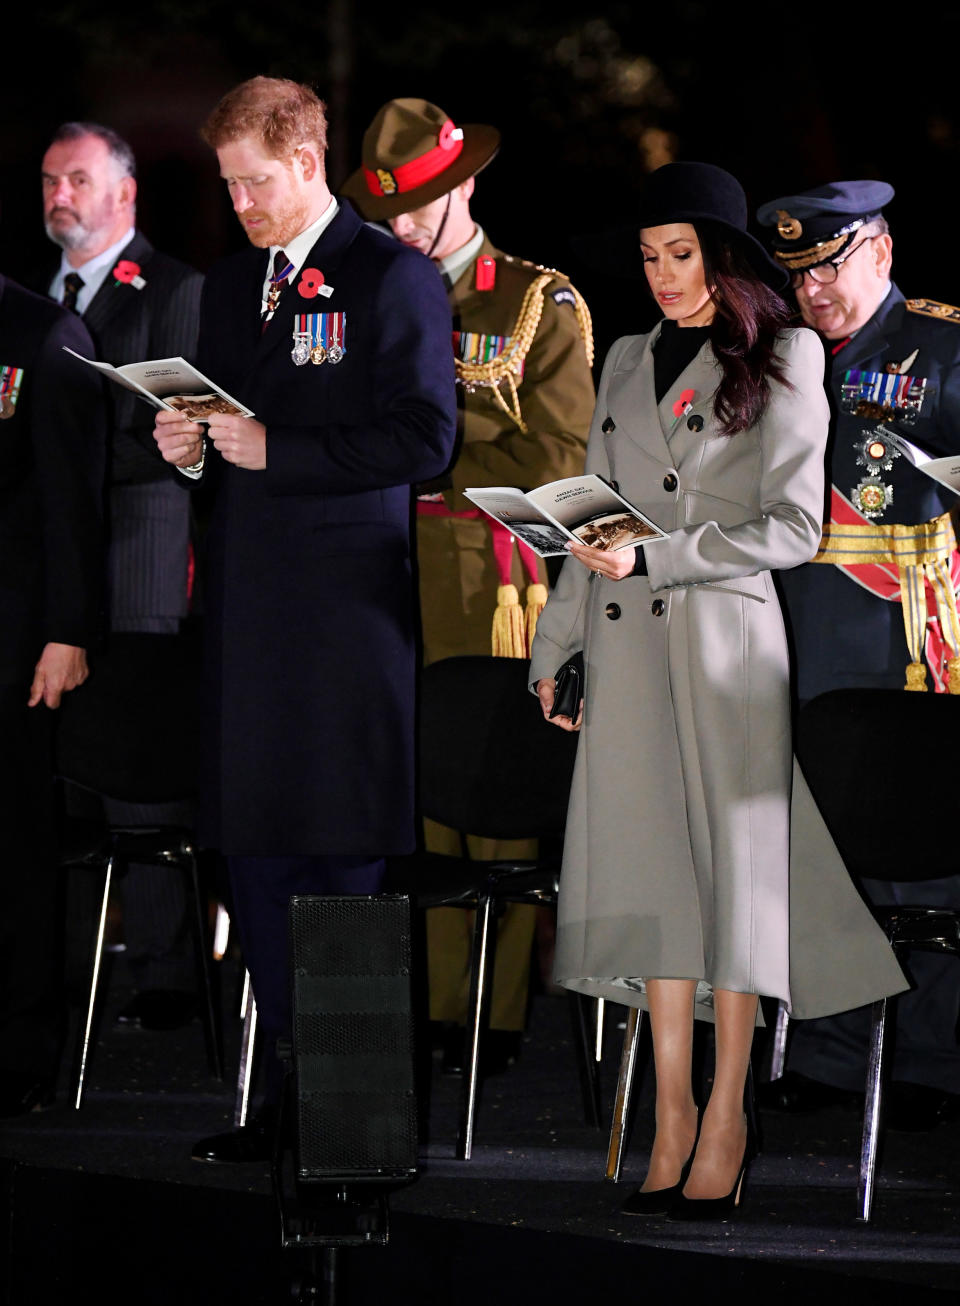 Harry and Meghan sang hymns during the service [Photo: Getty]